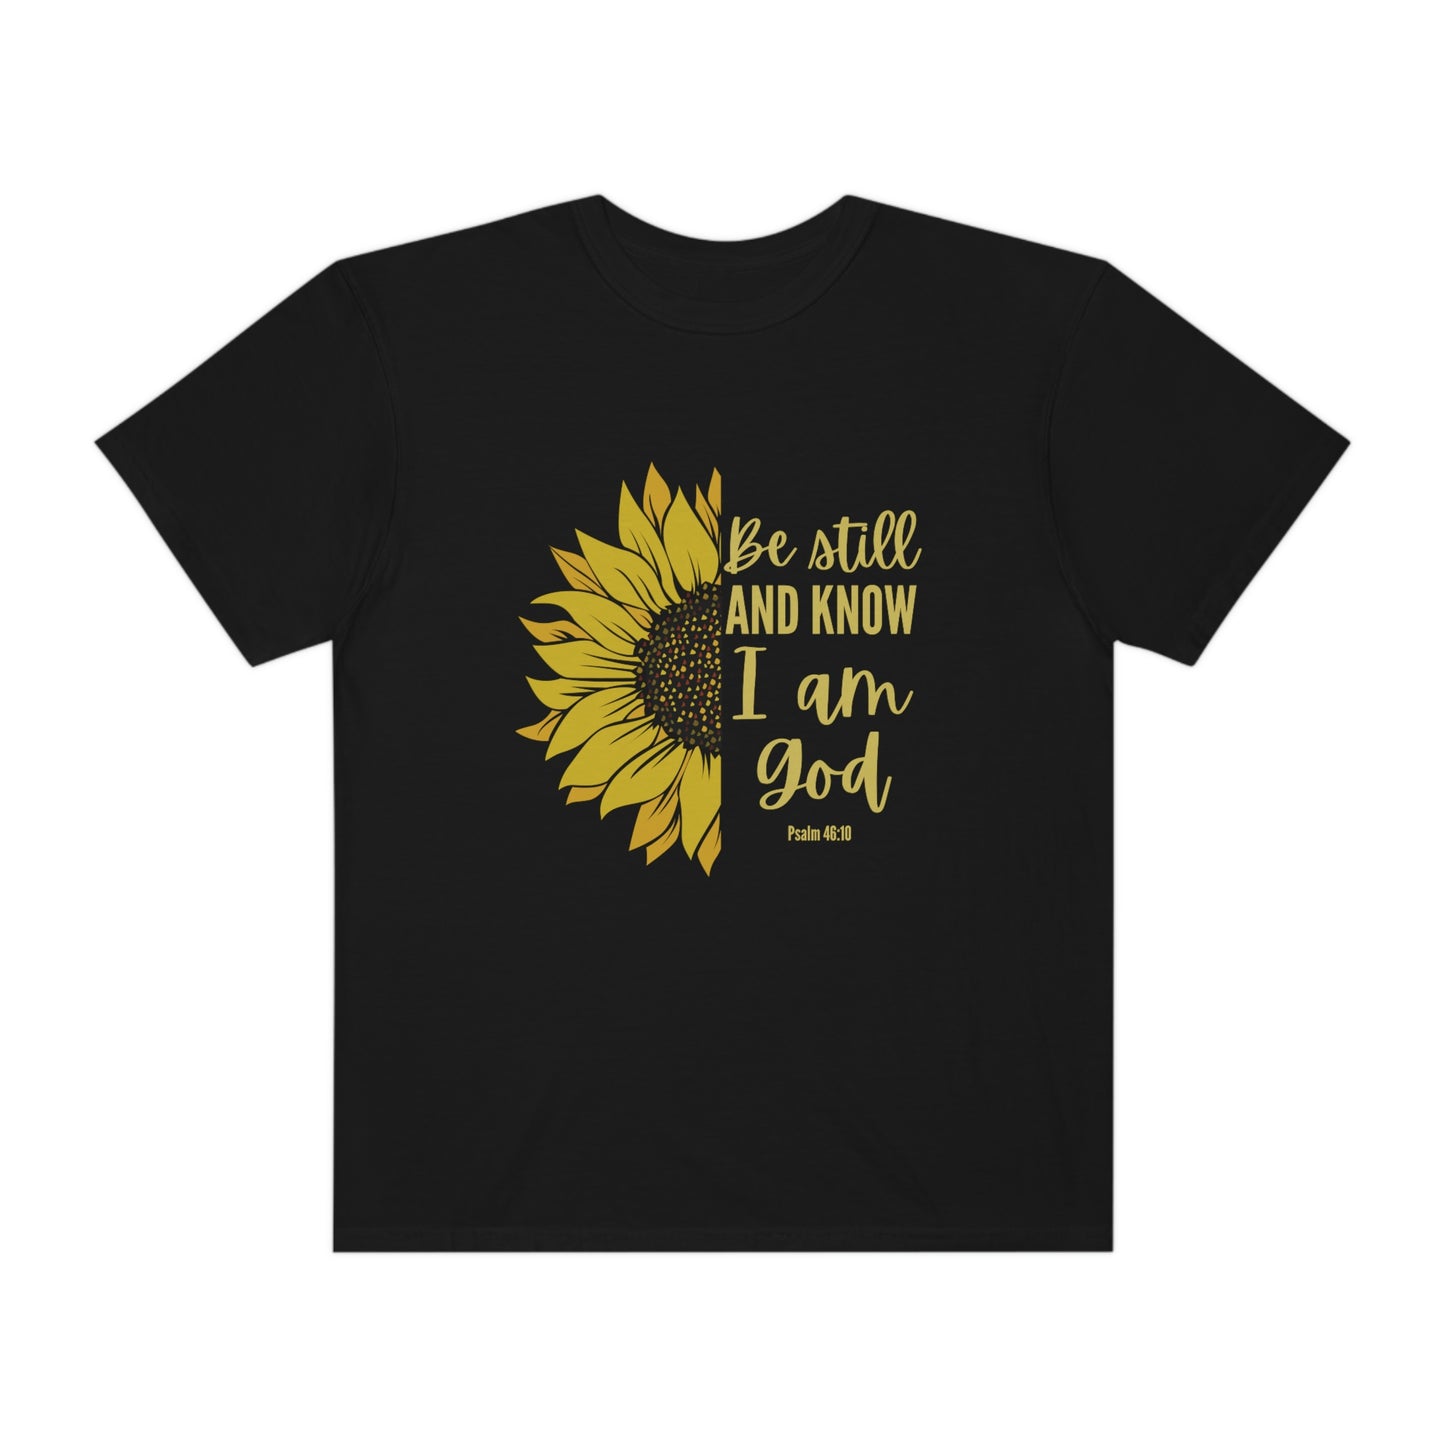 Be Still and Know I am God, Psalm 46:10, Sunflower Comfort Colors Christian T-Shirt